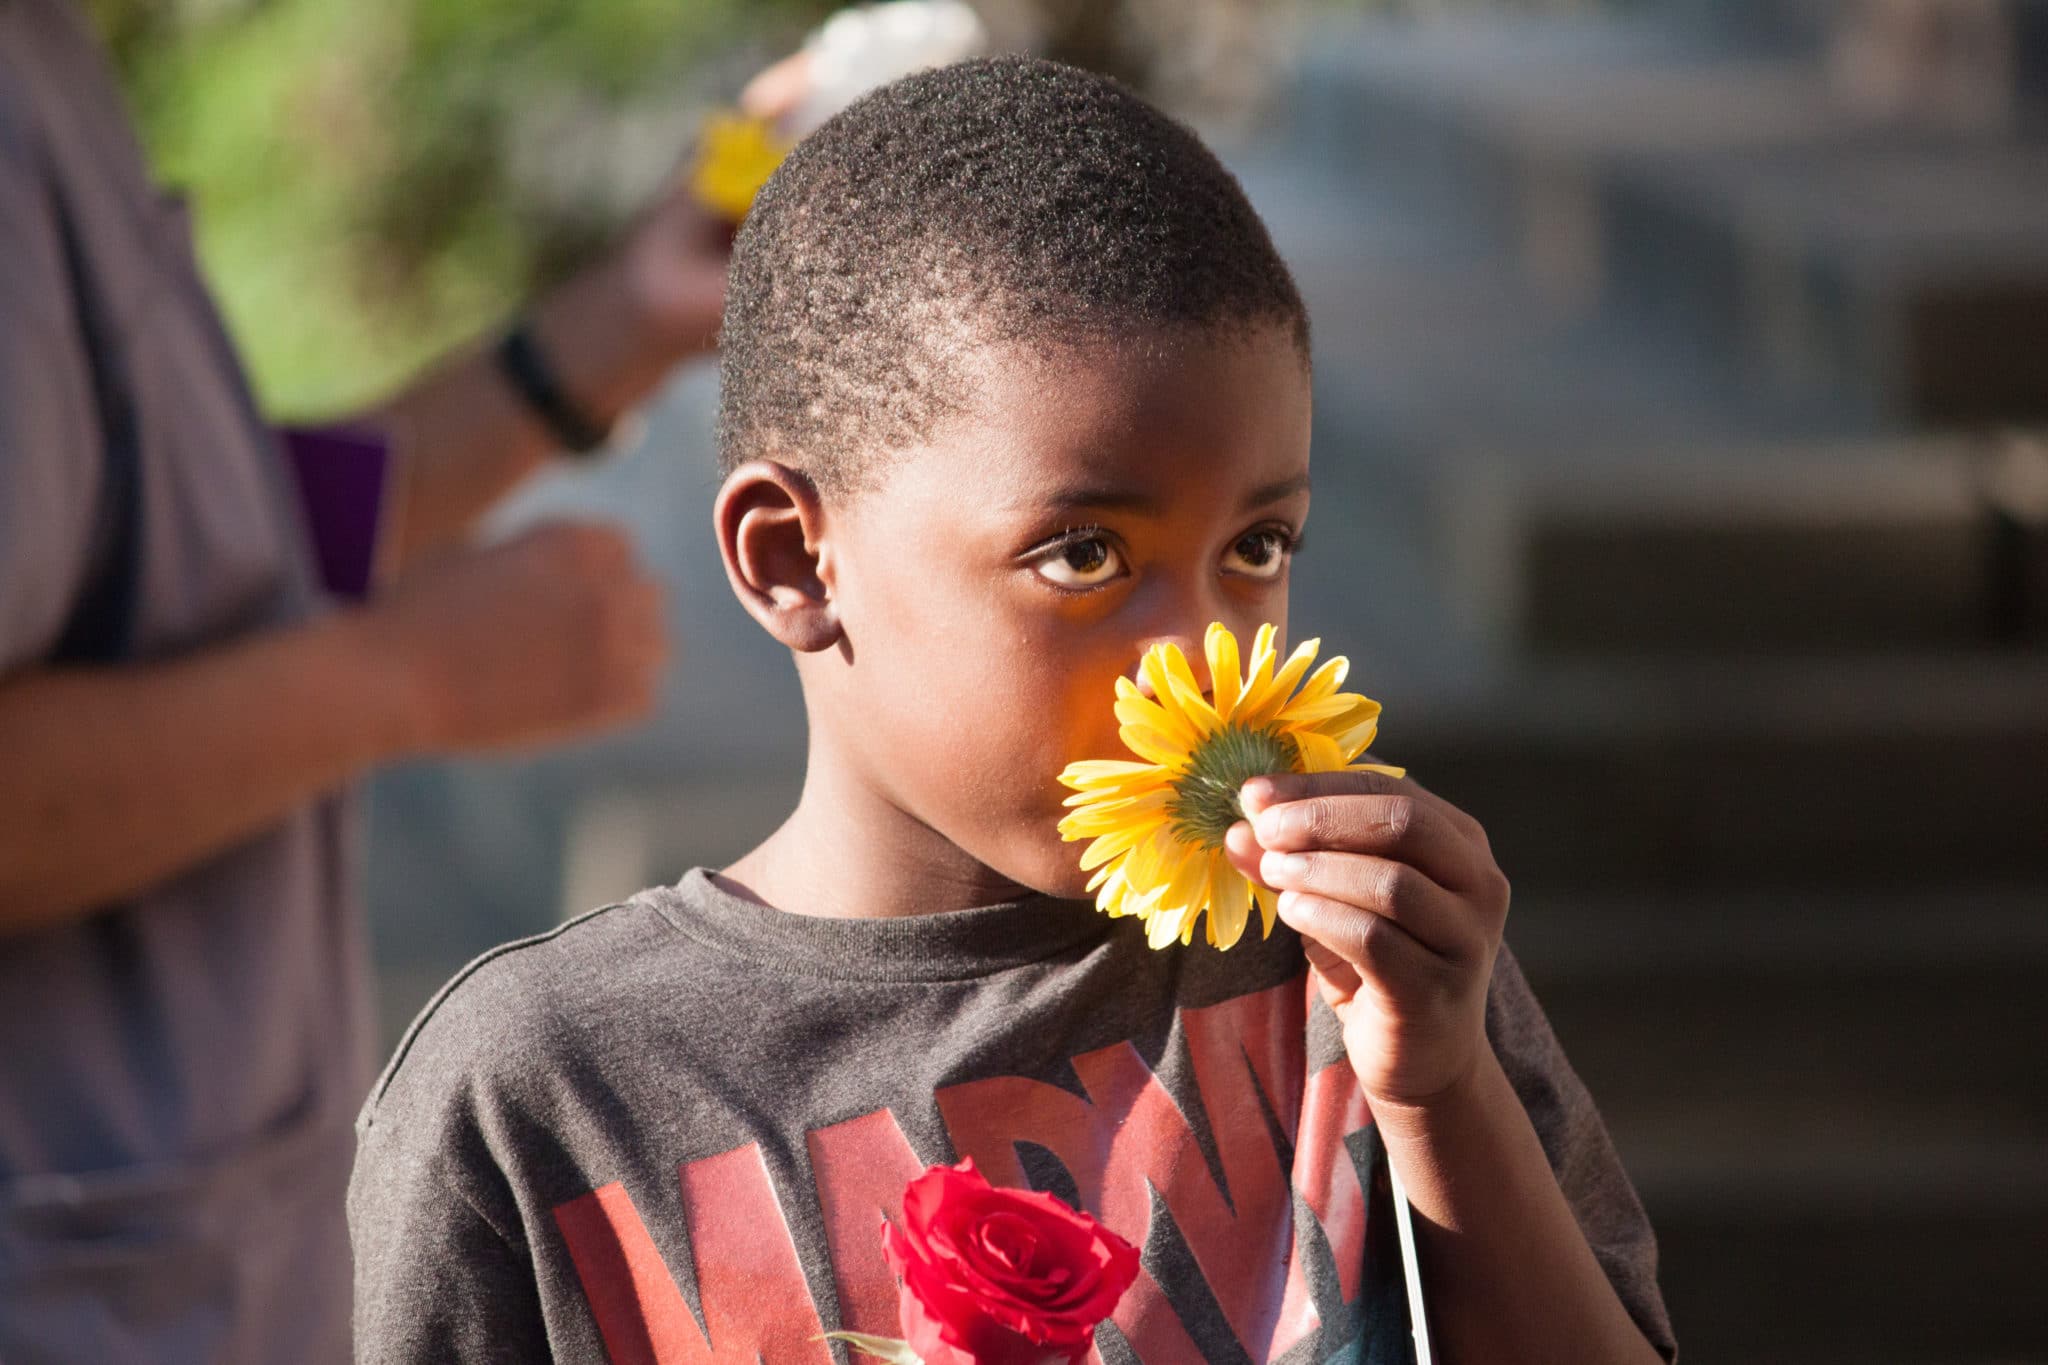 A child smelling a yellow flower